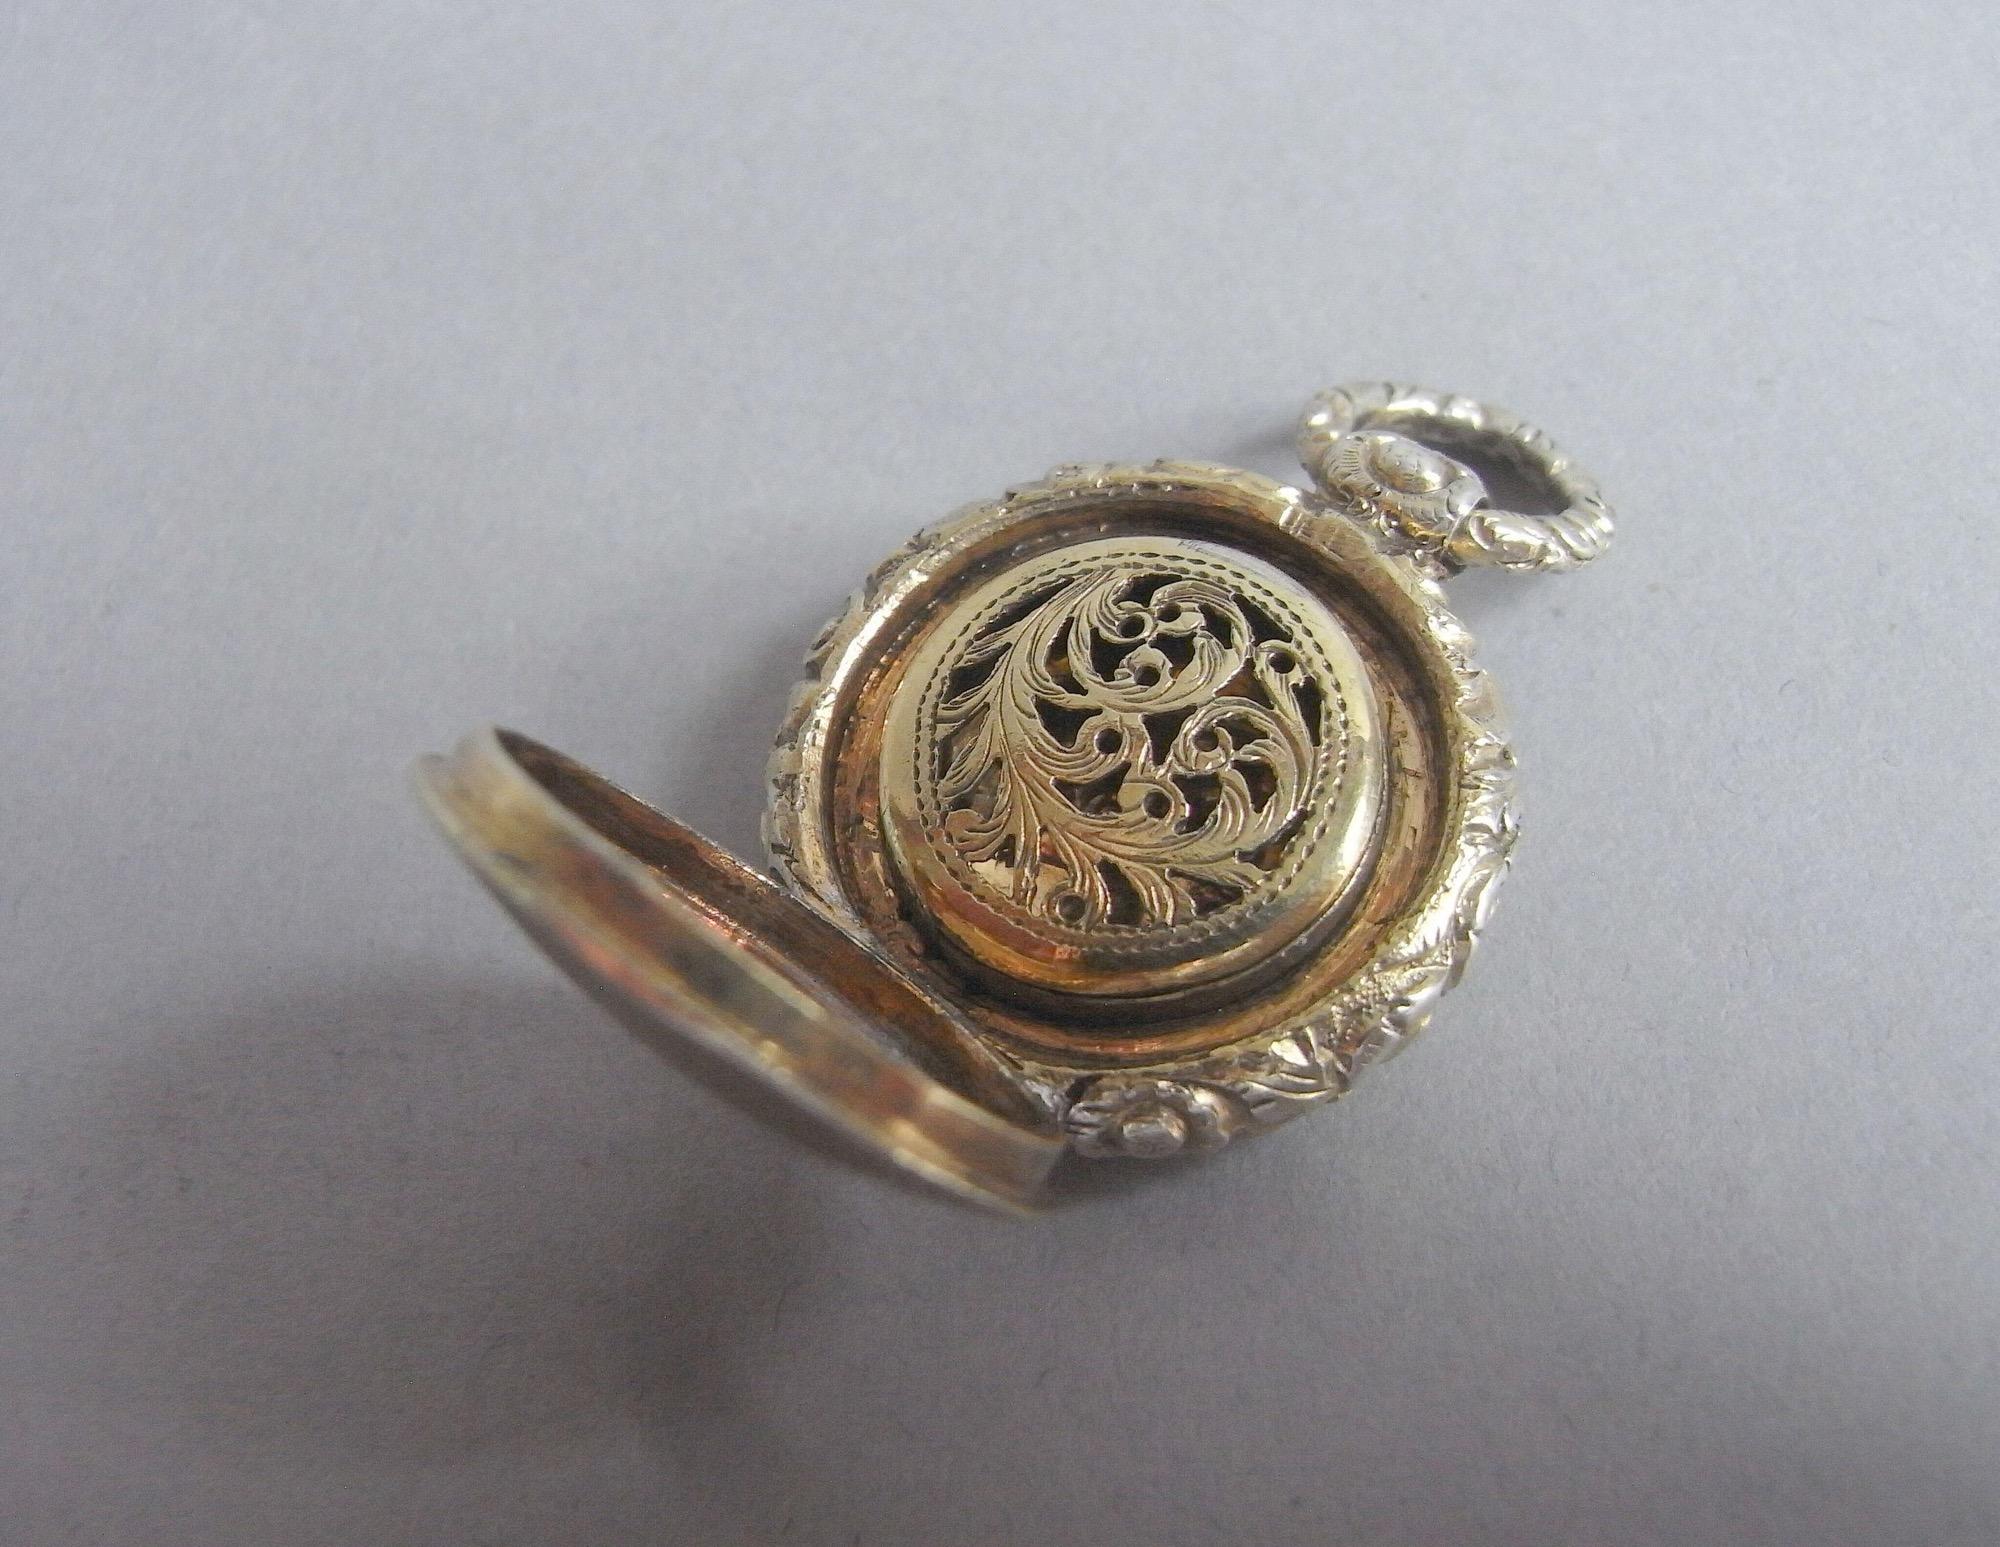 A William IV silver gilt Vinaigrette of unusually small size, probably for a child. Made in Birmingham in 1831 by Thomas Shaw.

The Vinaigrette is silver gilt and is modelled as a pocket watch. The small size leads us to believe that it may well